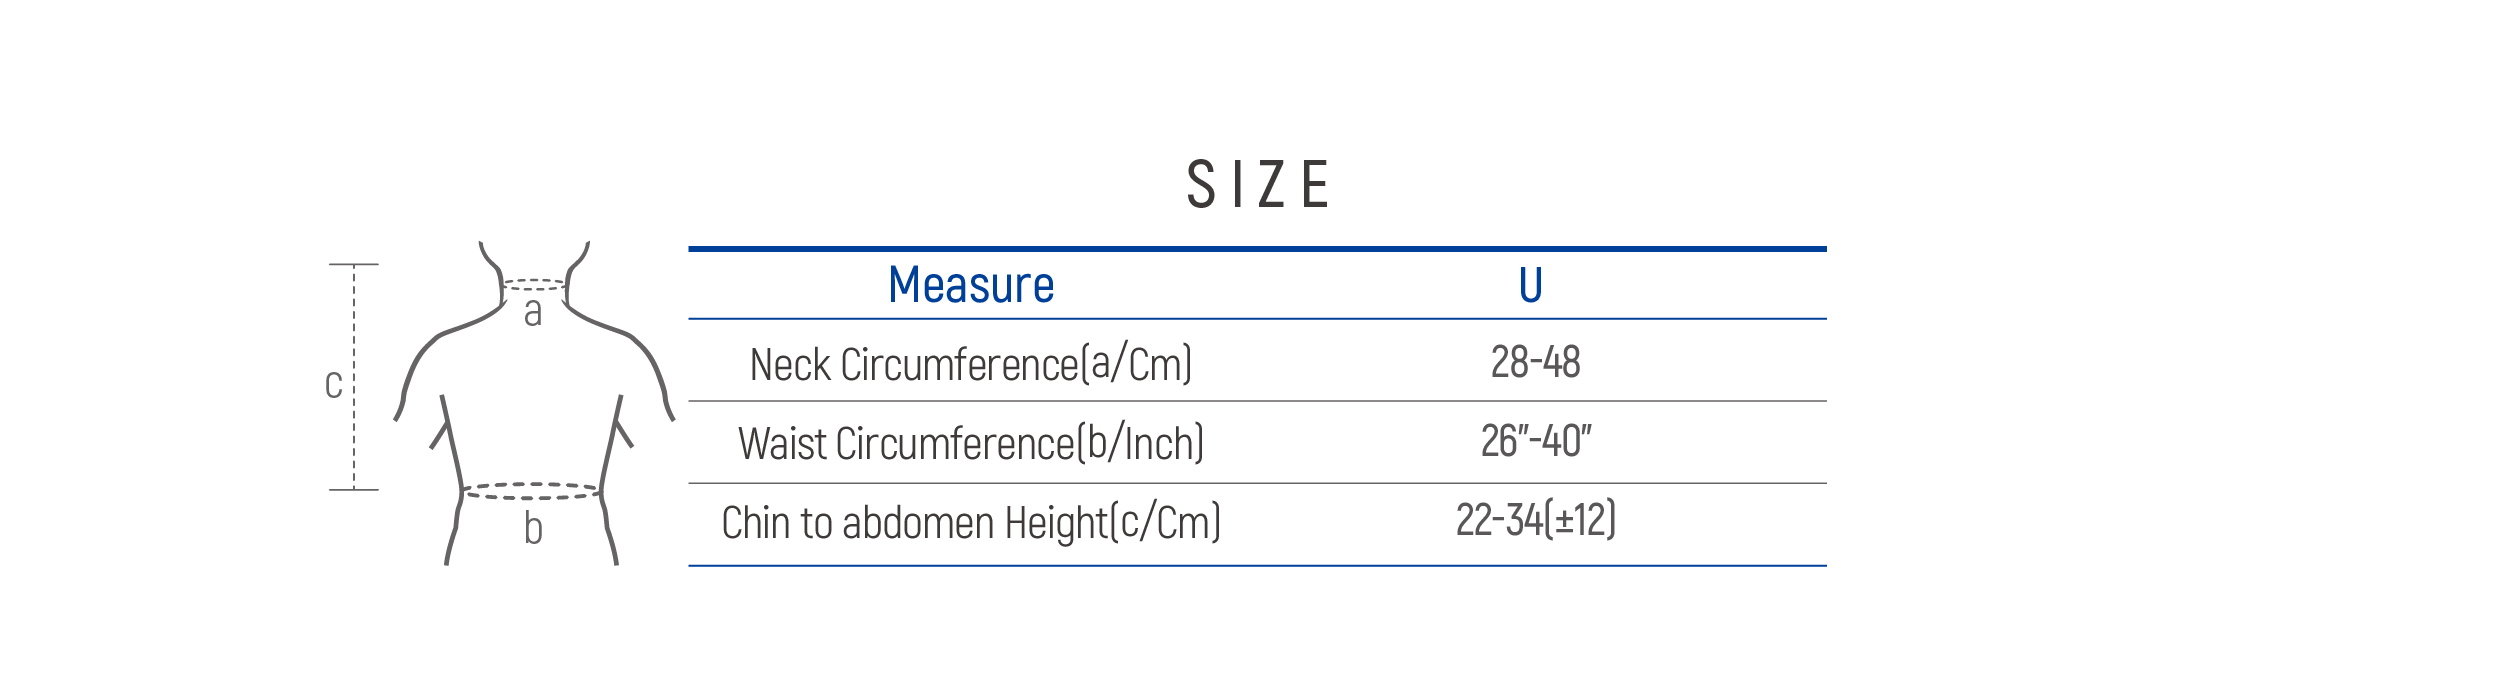 DR-C131 Size table image